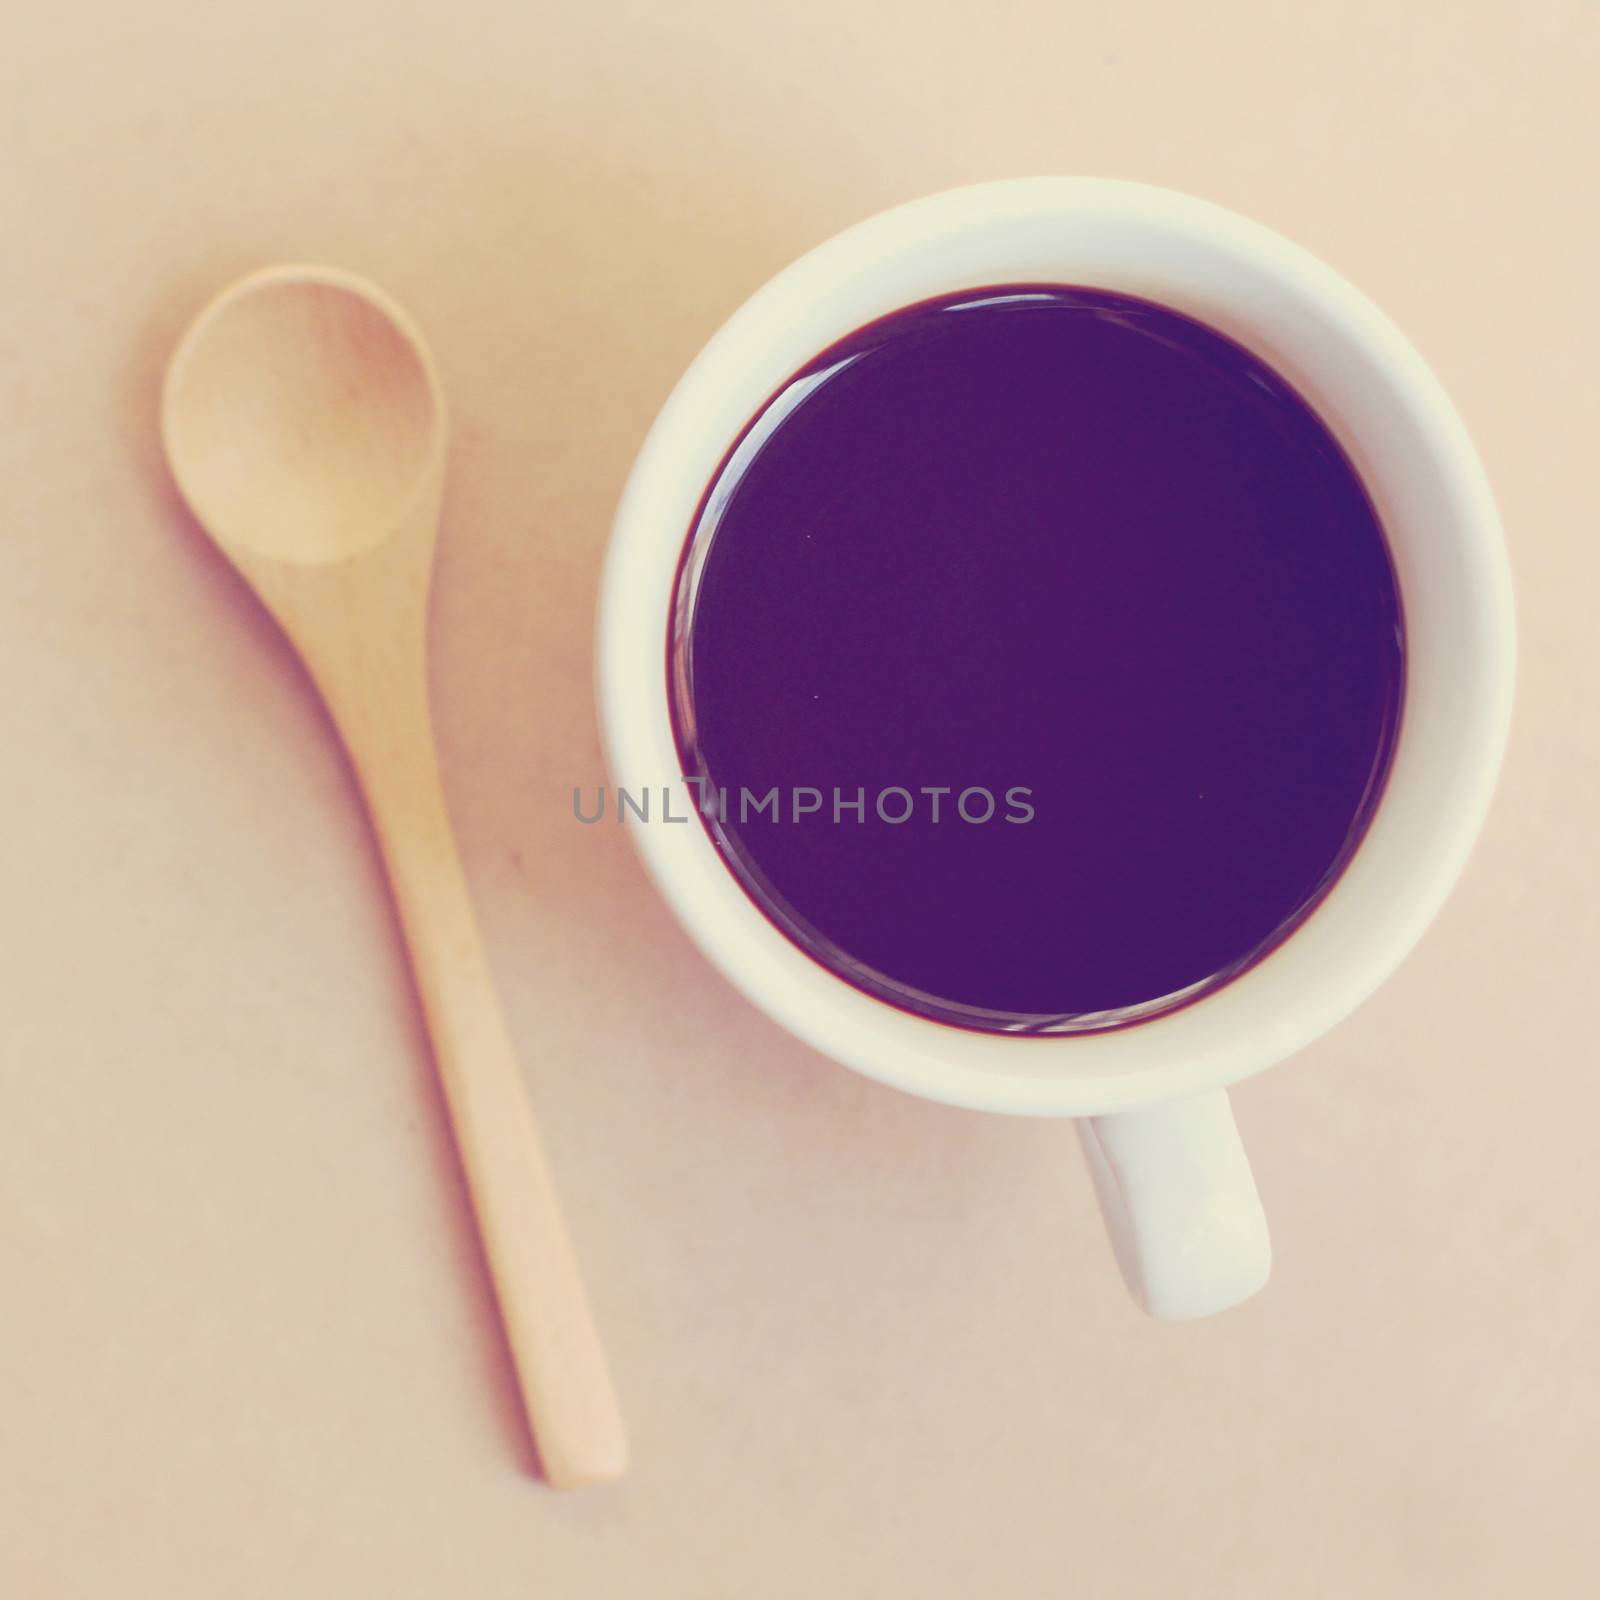 Black coffee and spoon with retro filter effect by nuchylee